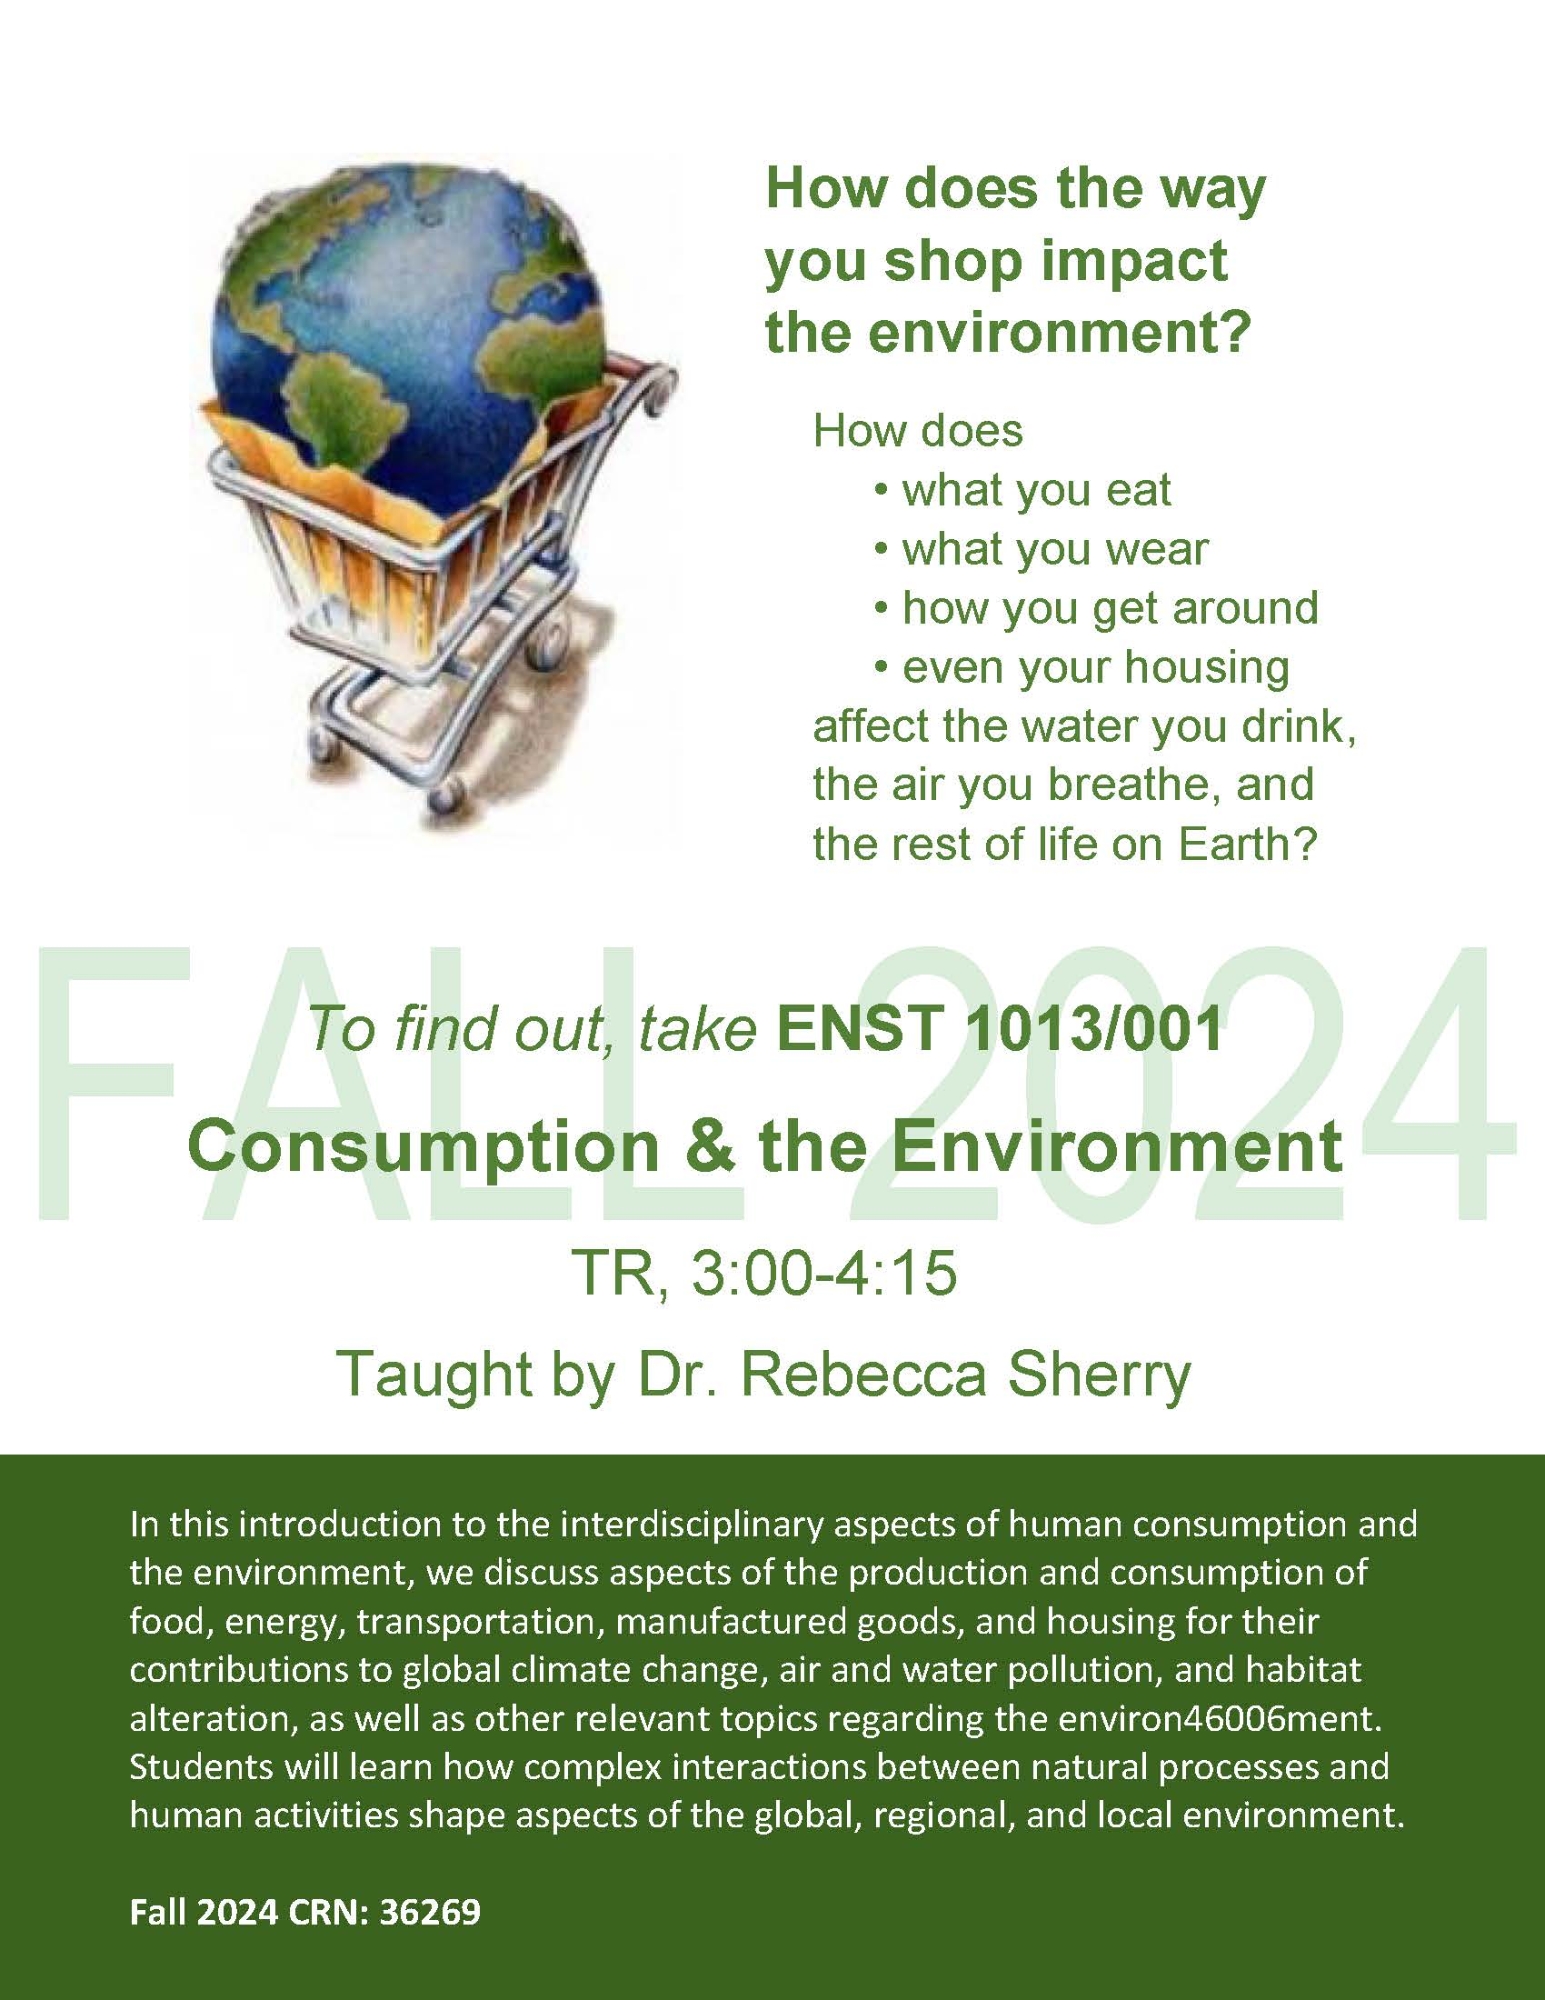 How does the way you shop impact the environment? How does • what you eat • what you wear • how you get around • even your housing affect the water you drink, the air you breathe, and the rest of life on Earth? To find out, take ENST 1013/001 Consumption & the Environment TR, 3:00-4:15 Taught by Dr. Rebecca Sherry In this introduction to the interdisciplinary aspects of human consumption and the environment, we discuss aspects of the production and consumption of food, energy, transportation, manufactured goods, and housing for their contributions to global climate change, air and water pollution, and habitat alteration, as well as other relevant topics regarding the environ46006ment. Students will learn how complex interactions between natural processes and human activities shape aspects of the global, regional, and local environment. Fall 2024 CRN: 36269